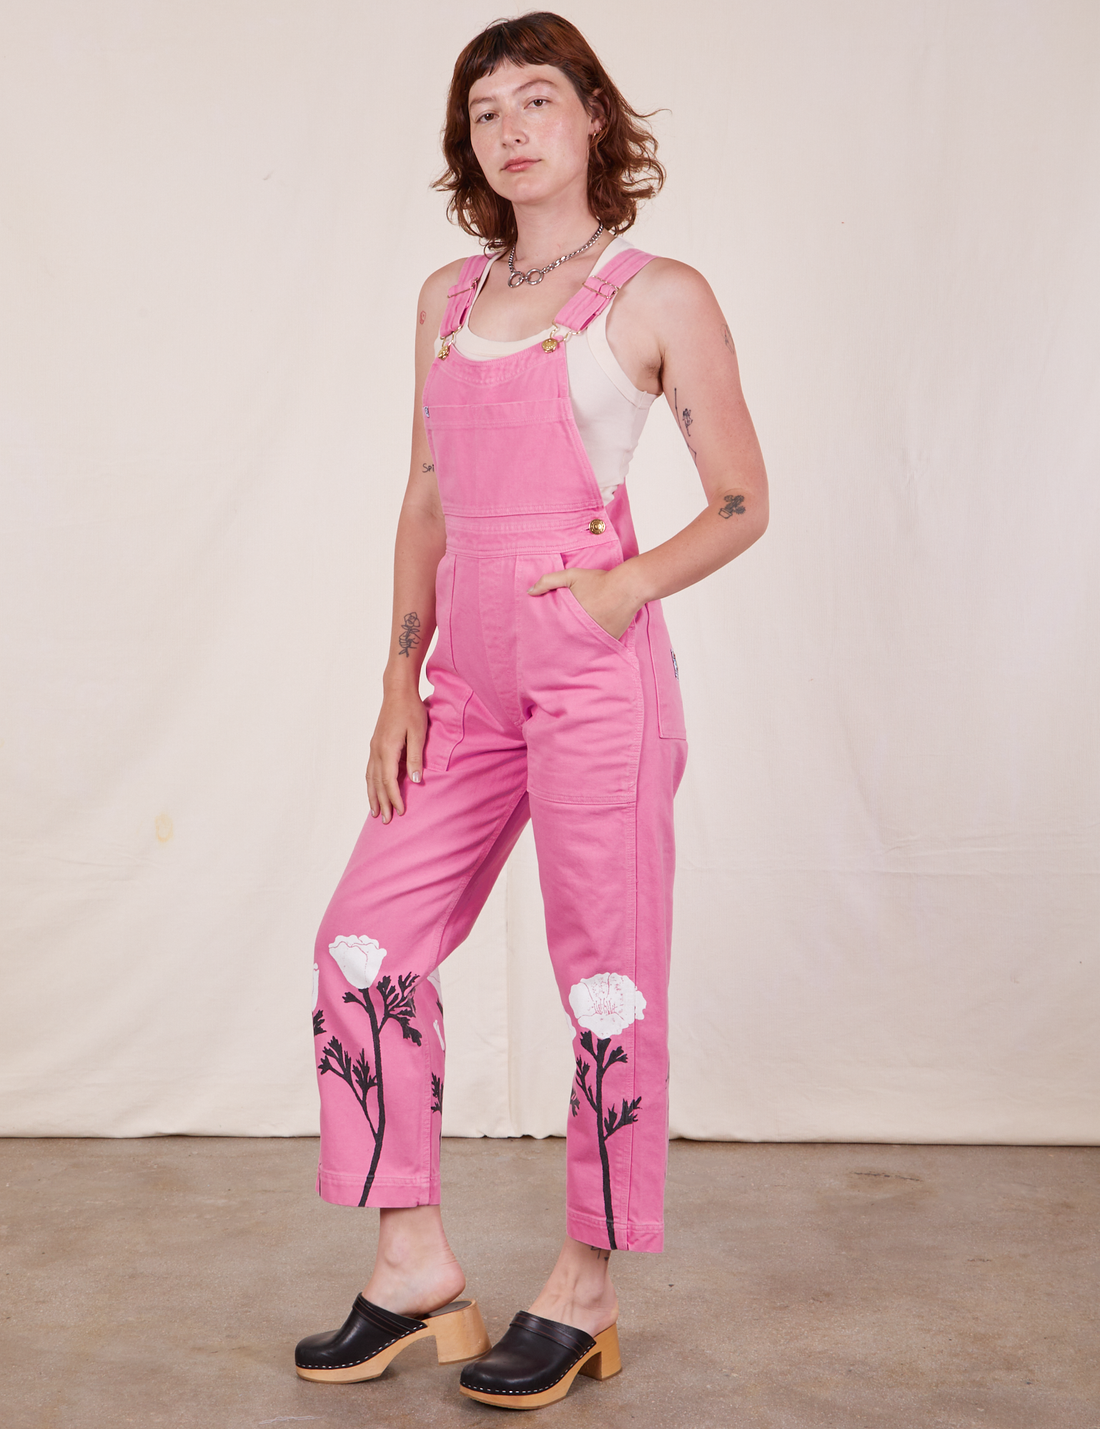 Angled view of California Poppy Overalls in Bubblegum Pink and vintage off-white Tank Top worn by Alex. She has her left hand on her left leg and the right hand in the pant pocket.